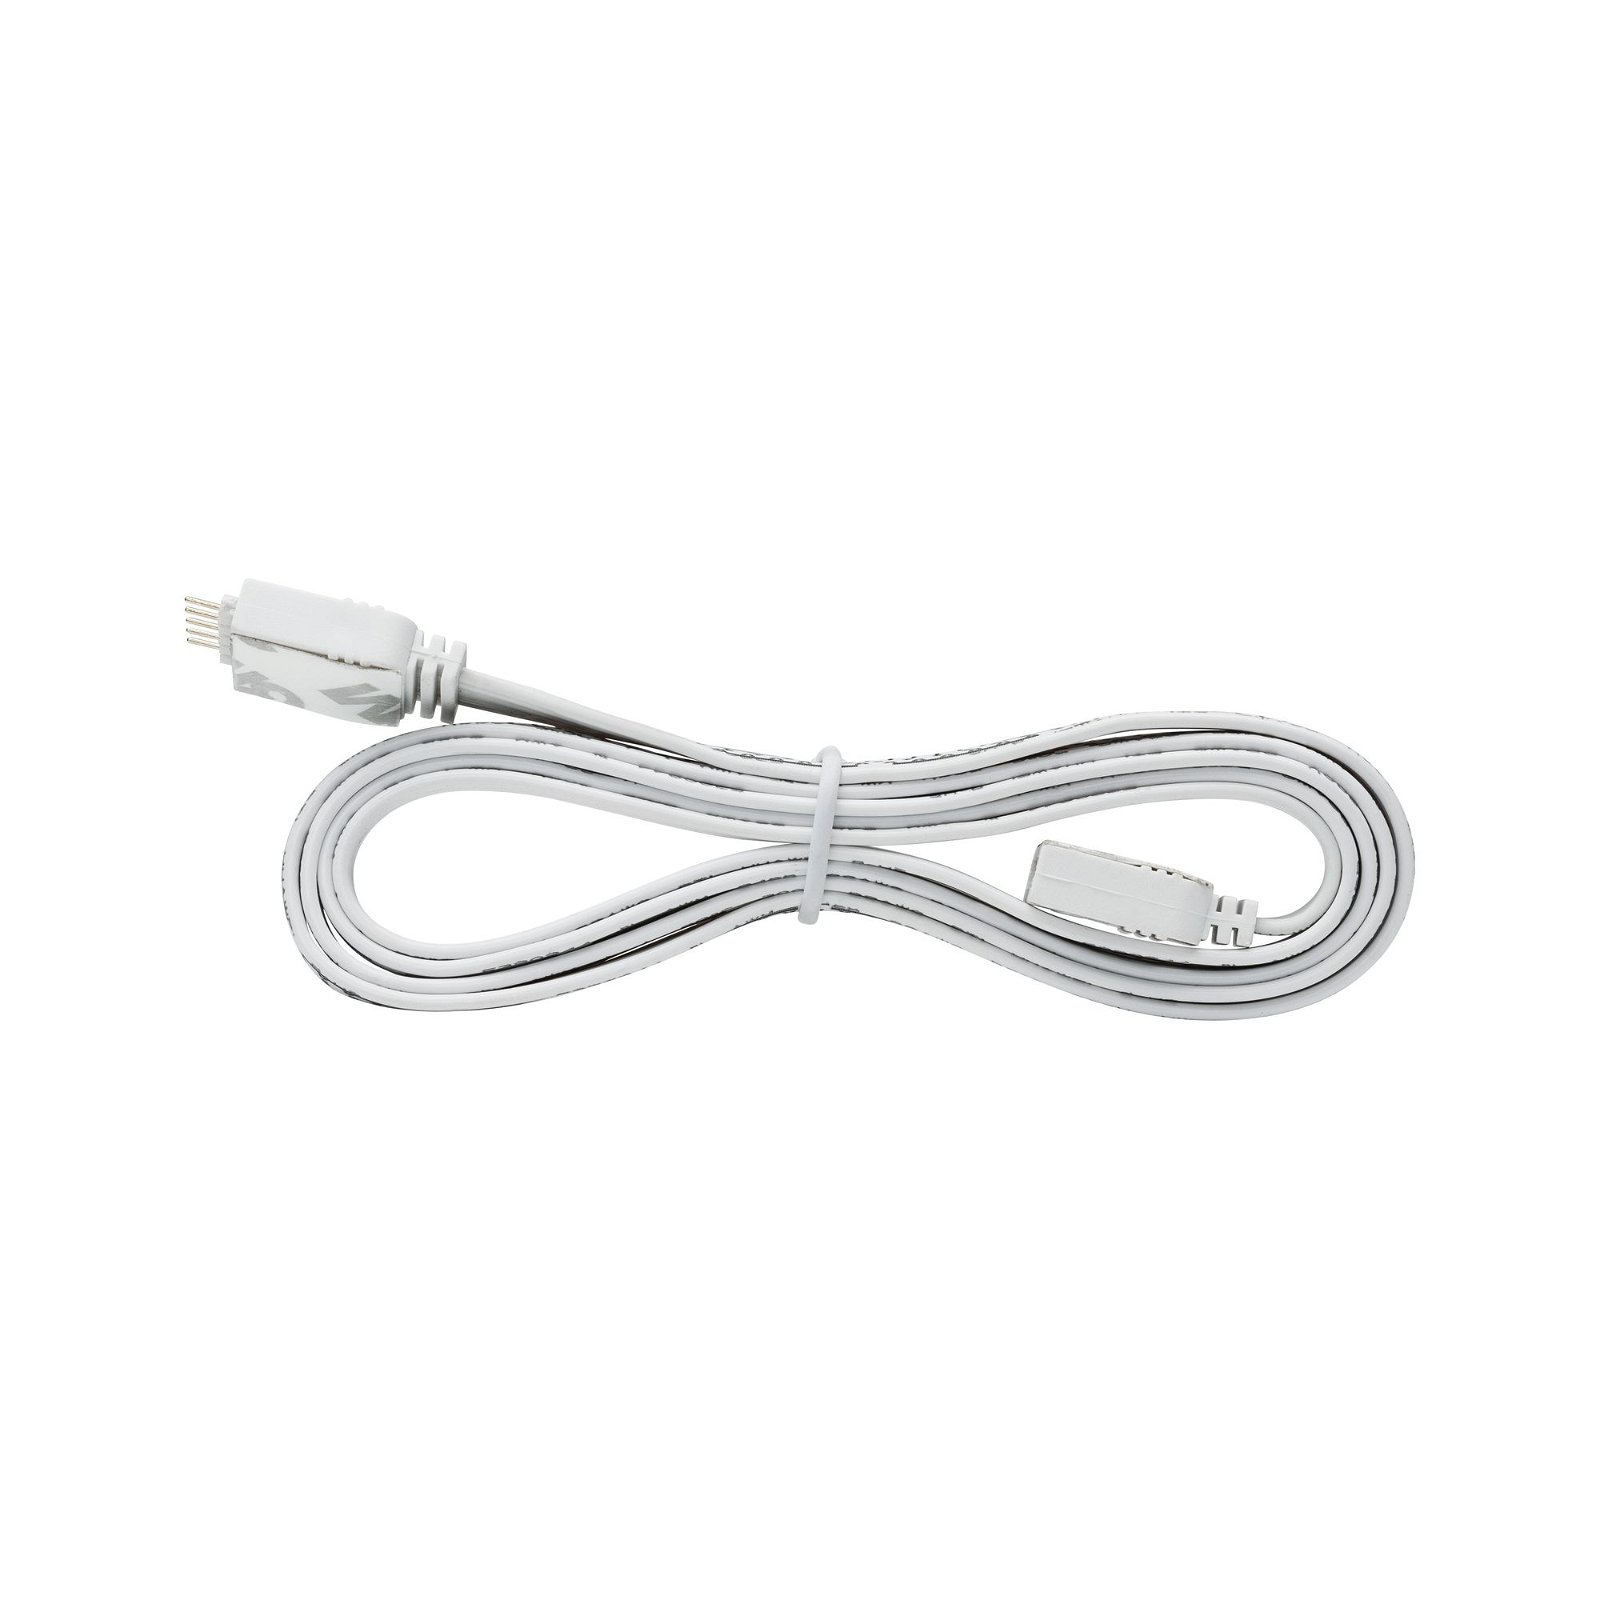 MaxLED Connector 1m White